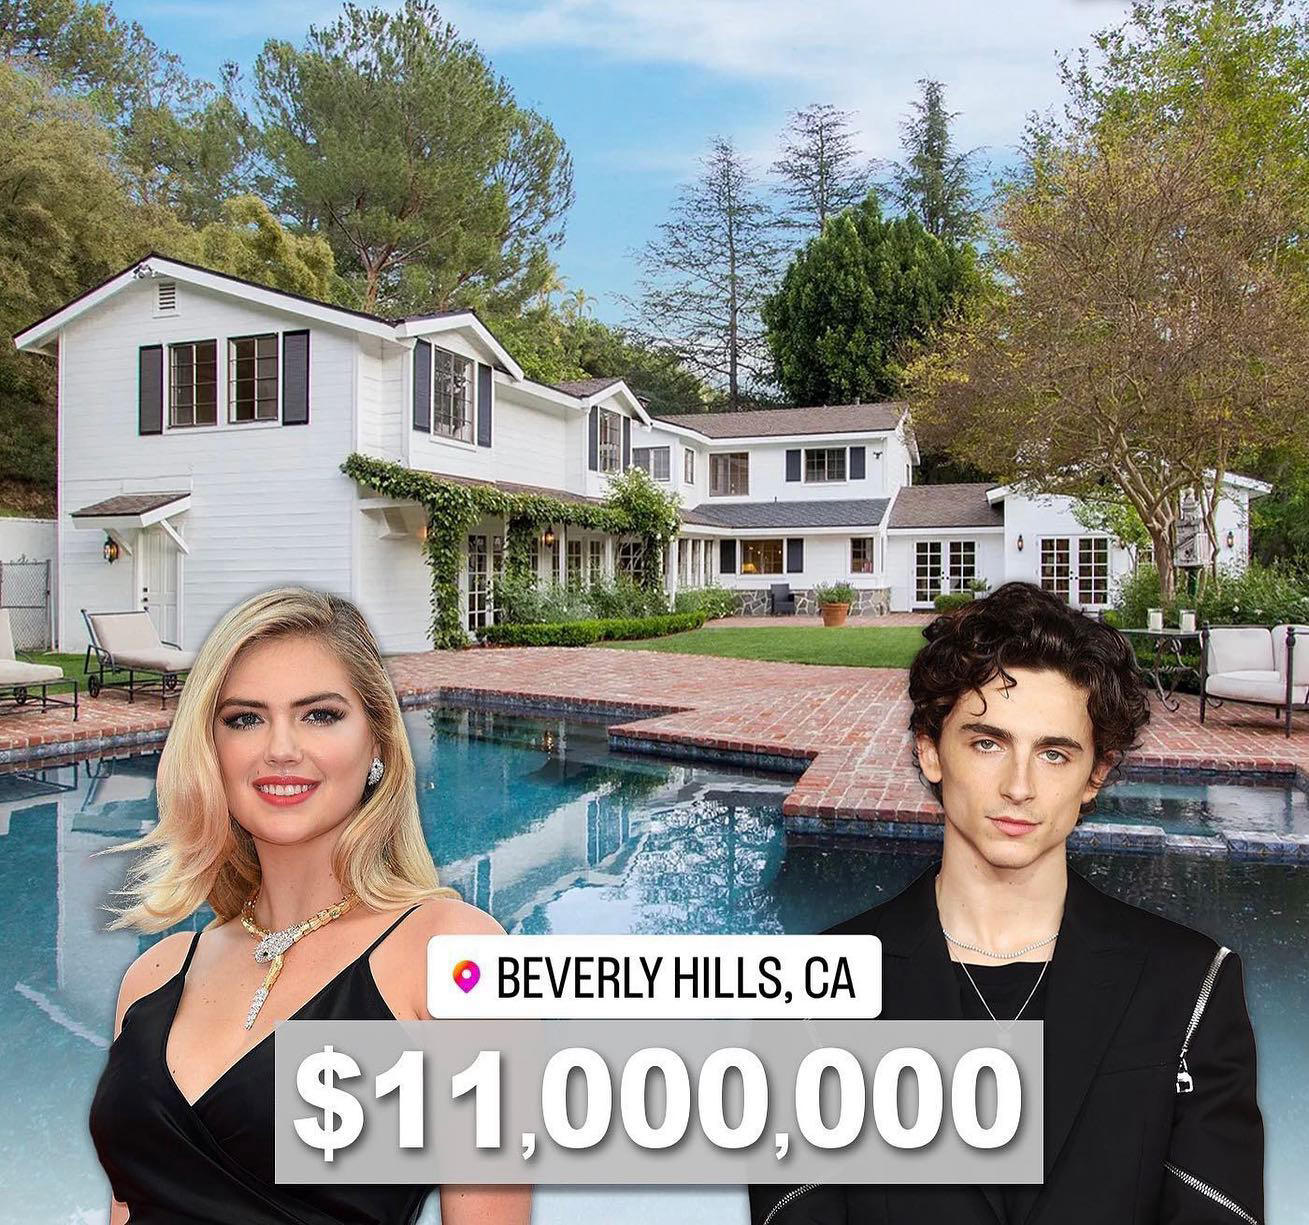 Luxury Real Estate - Actor #tchalamet recently bought this Beverly Hills estate from #kateupton for